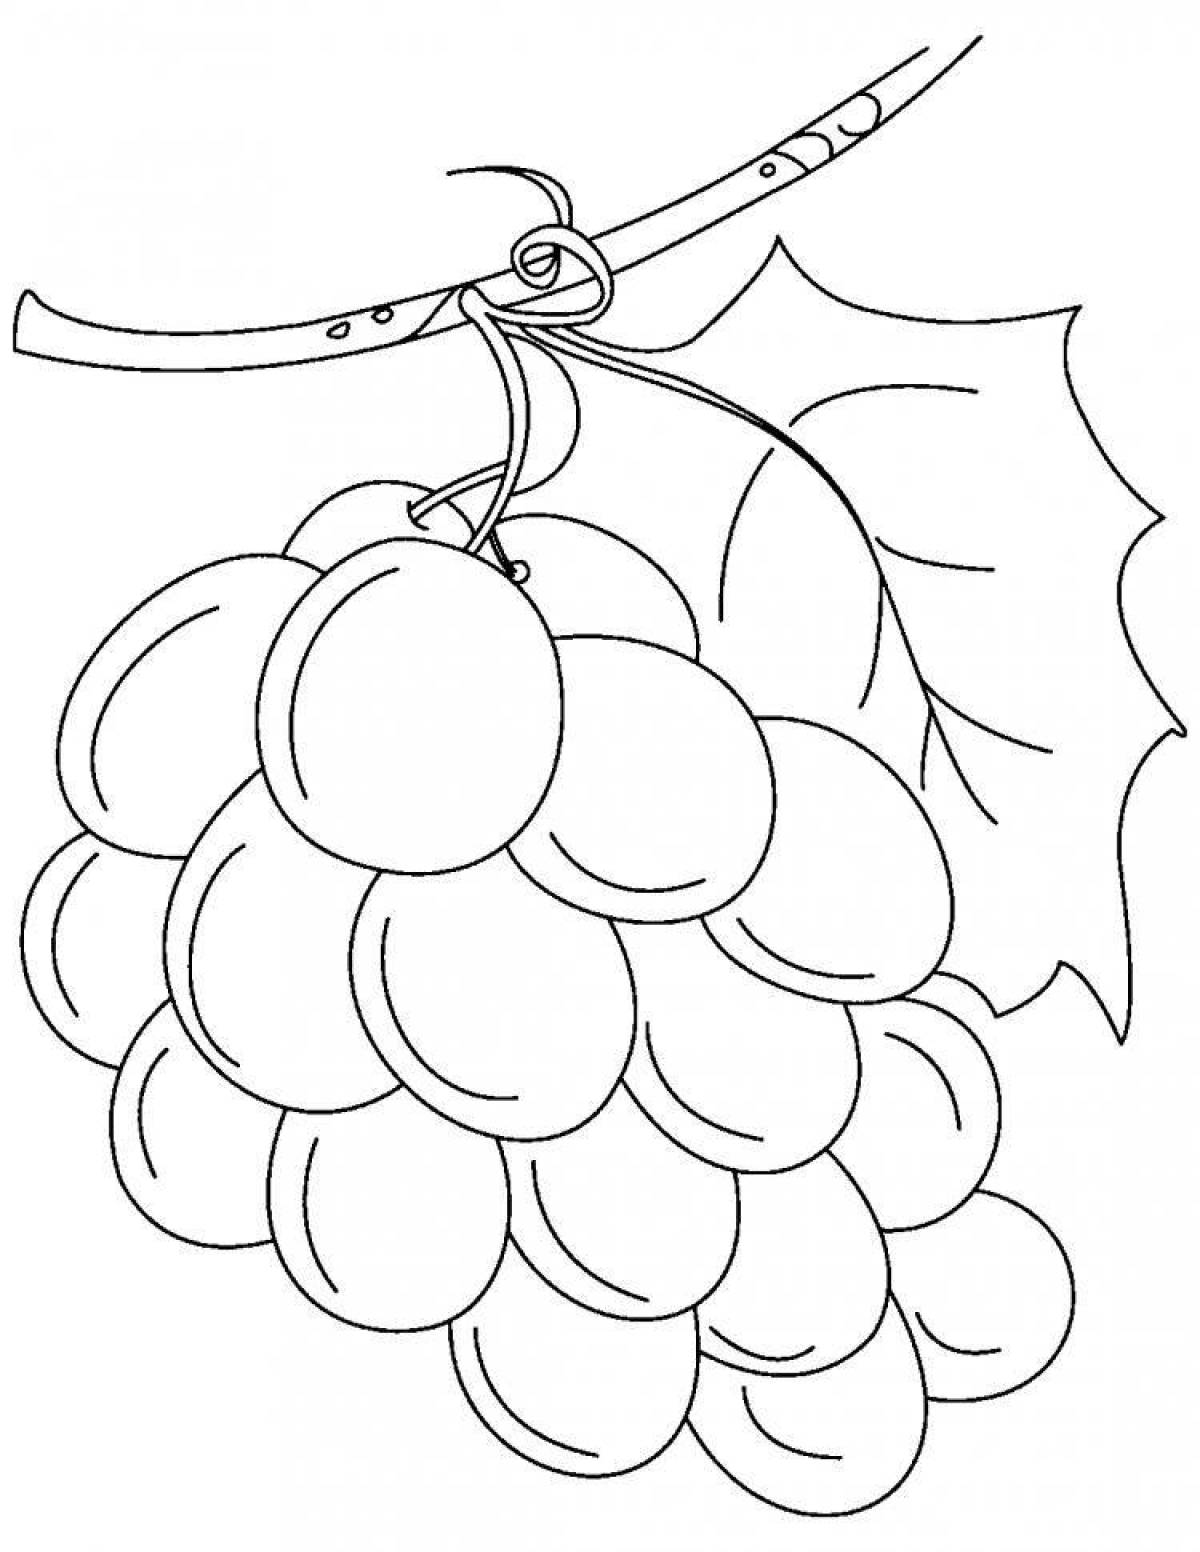 Shining grapes coloring book for kids